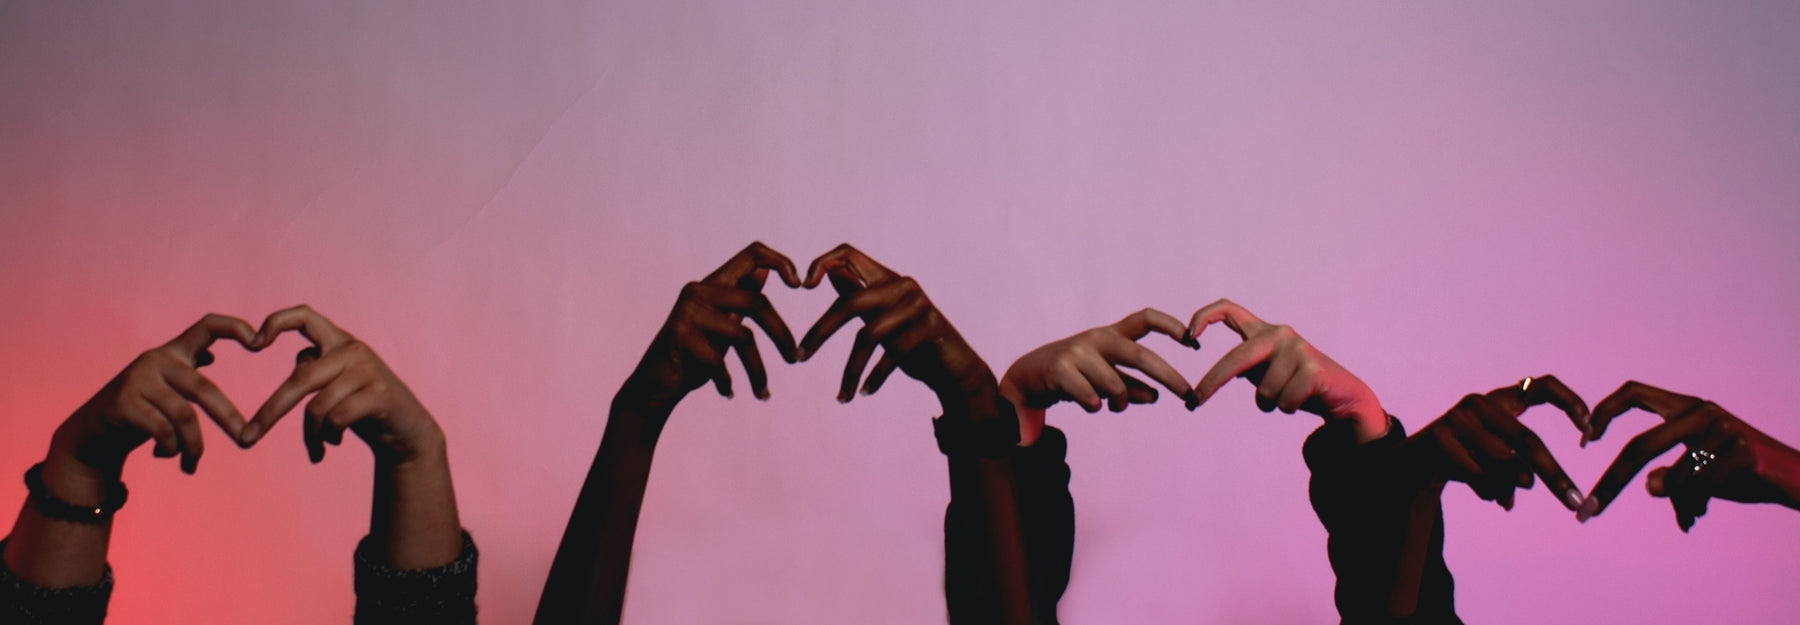 Four sets of hands forming hearts on a pinkish background